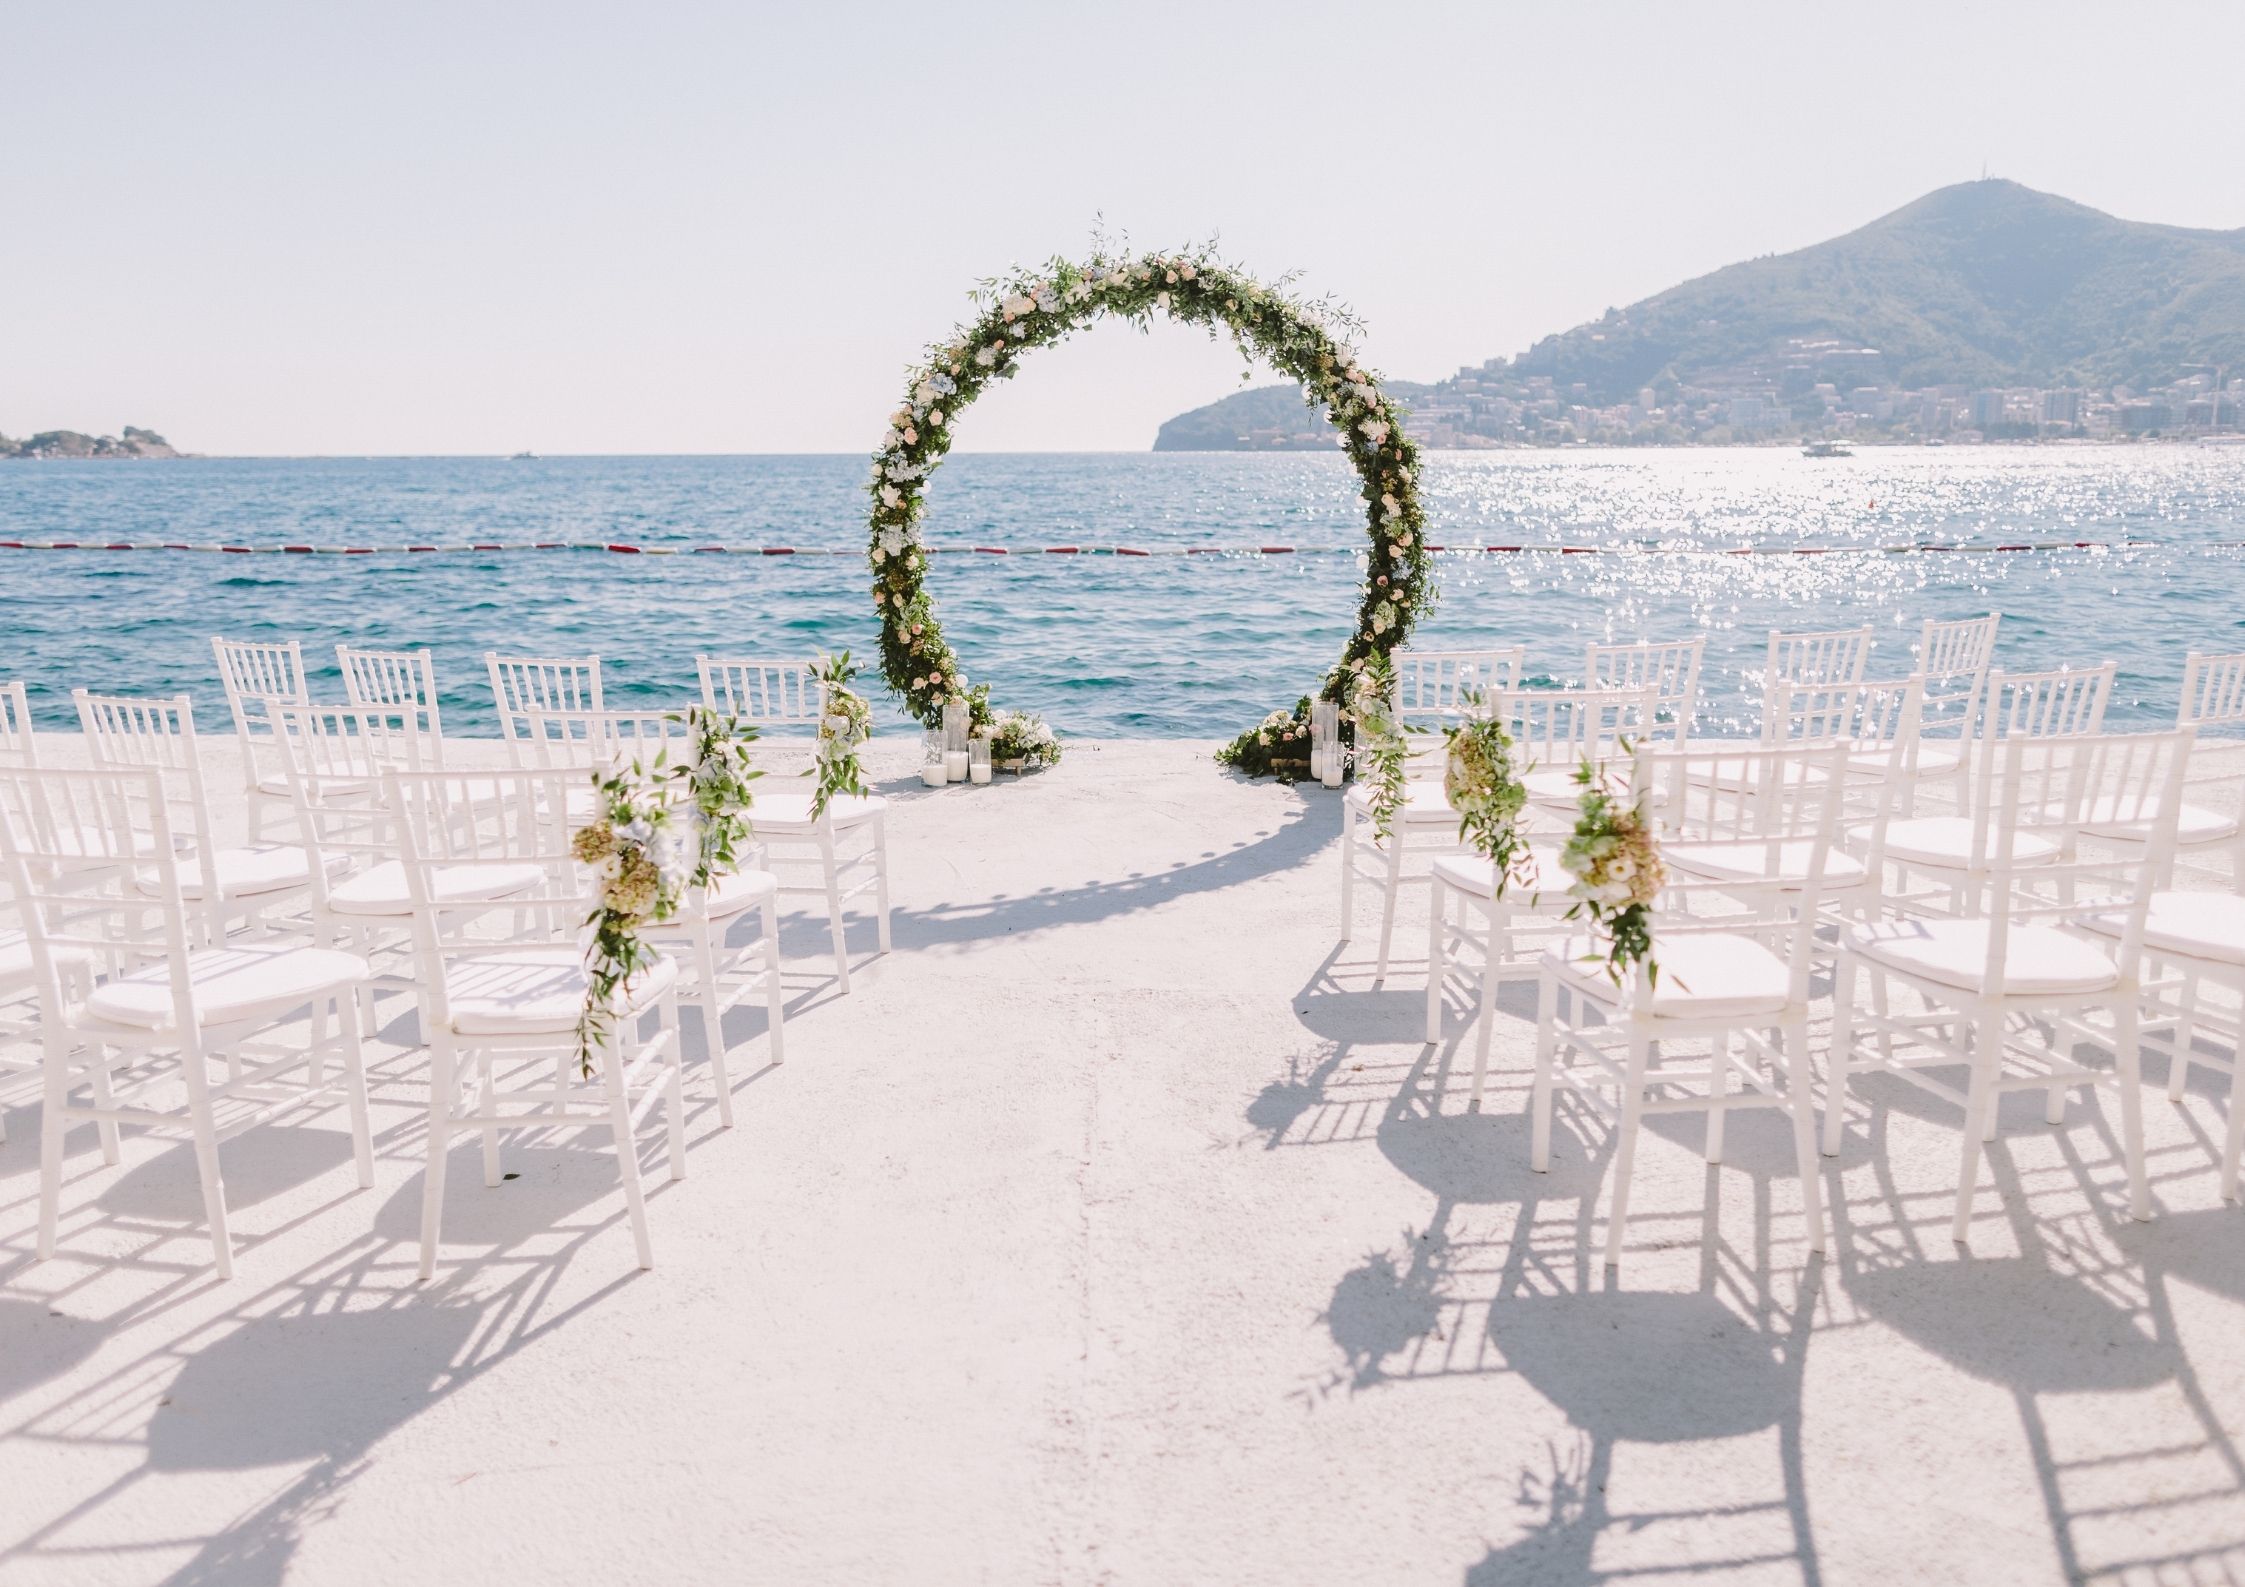 We’ve all heard the phrase ‘your wedding, your way’. Personally, I’m thrilled to see more and more couples abandoning convention and planning the wedding they want rather than the wedding tradition dictates. One option that’s becoming increasingly popular, especially for destination weddings, is the symbolic ceremony. 